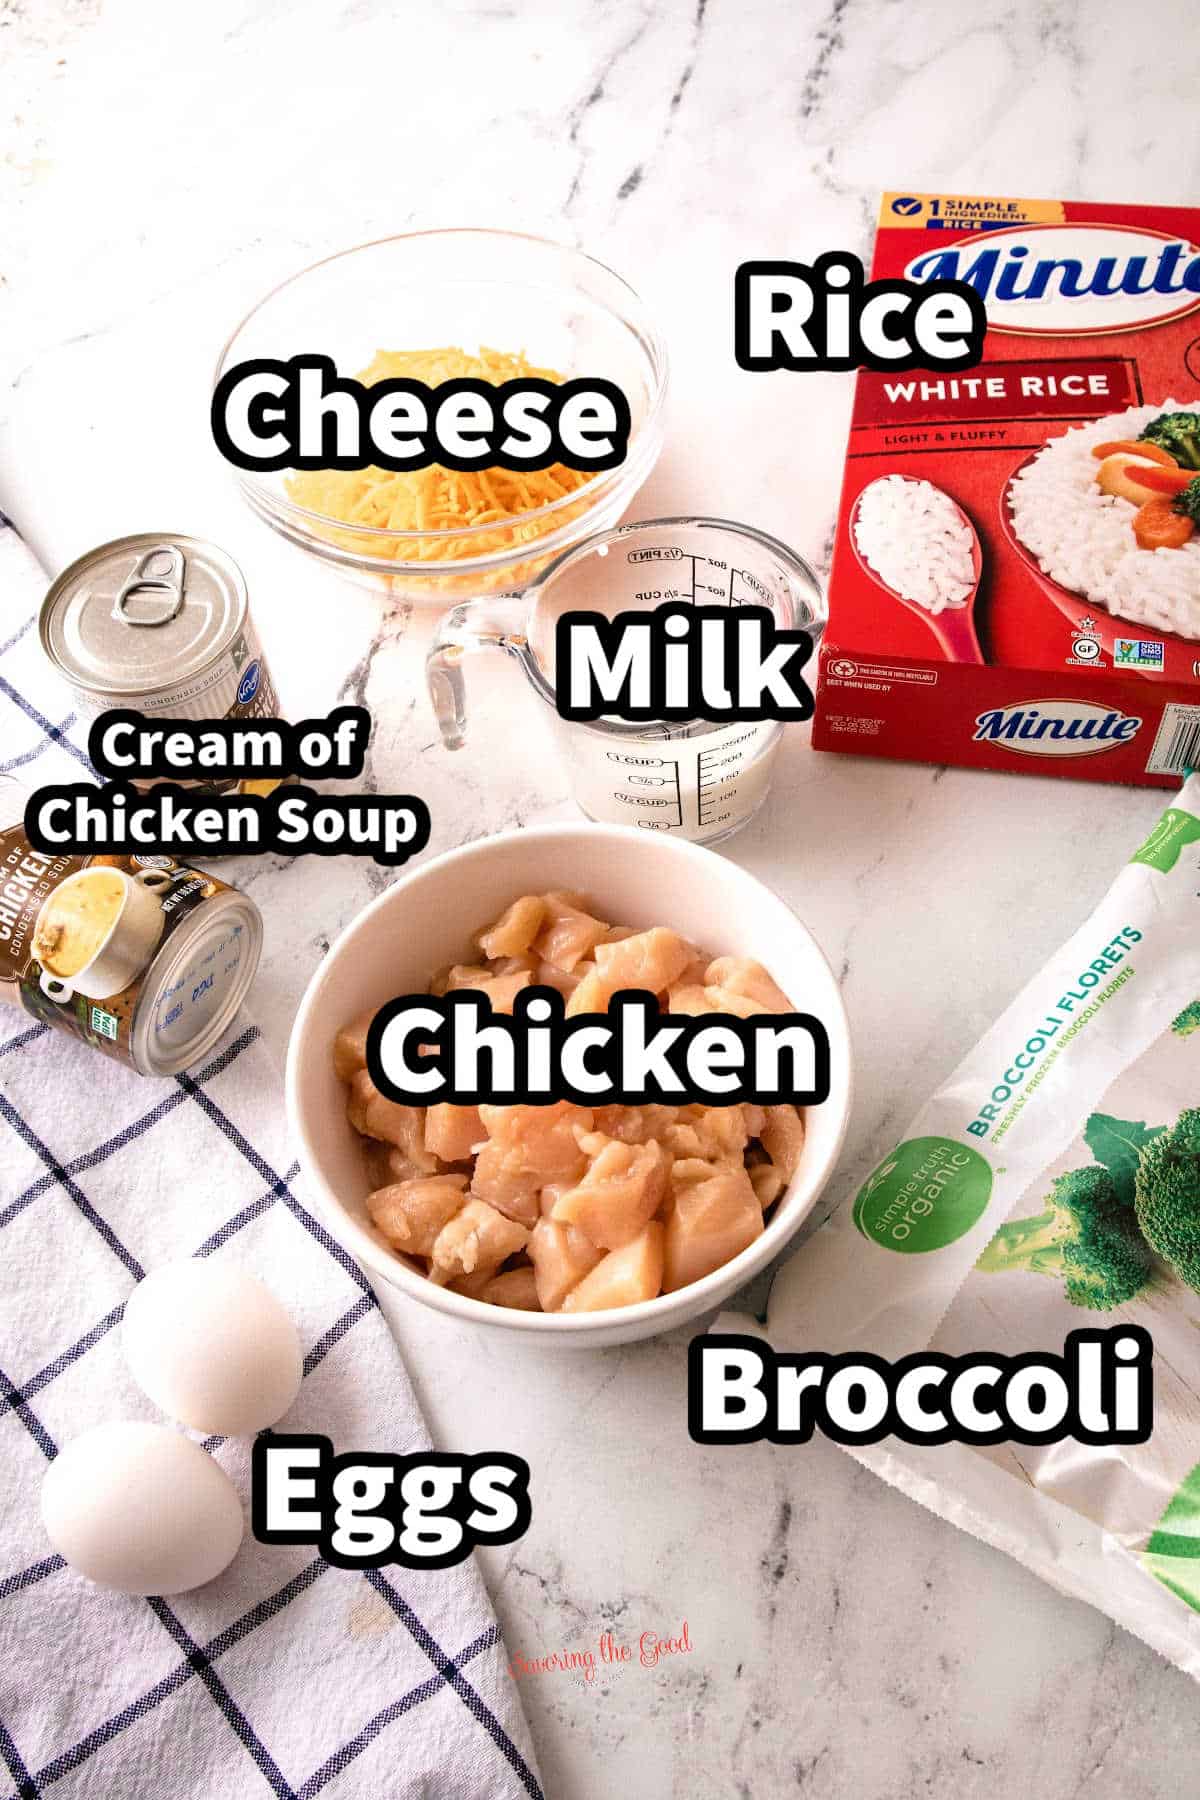 ingredients for chicken broccoli rice casserole, cheese, cream of chicken soup, raw chicken, eggs, broccoli, white rice with text overlay.